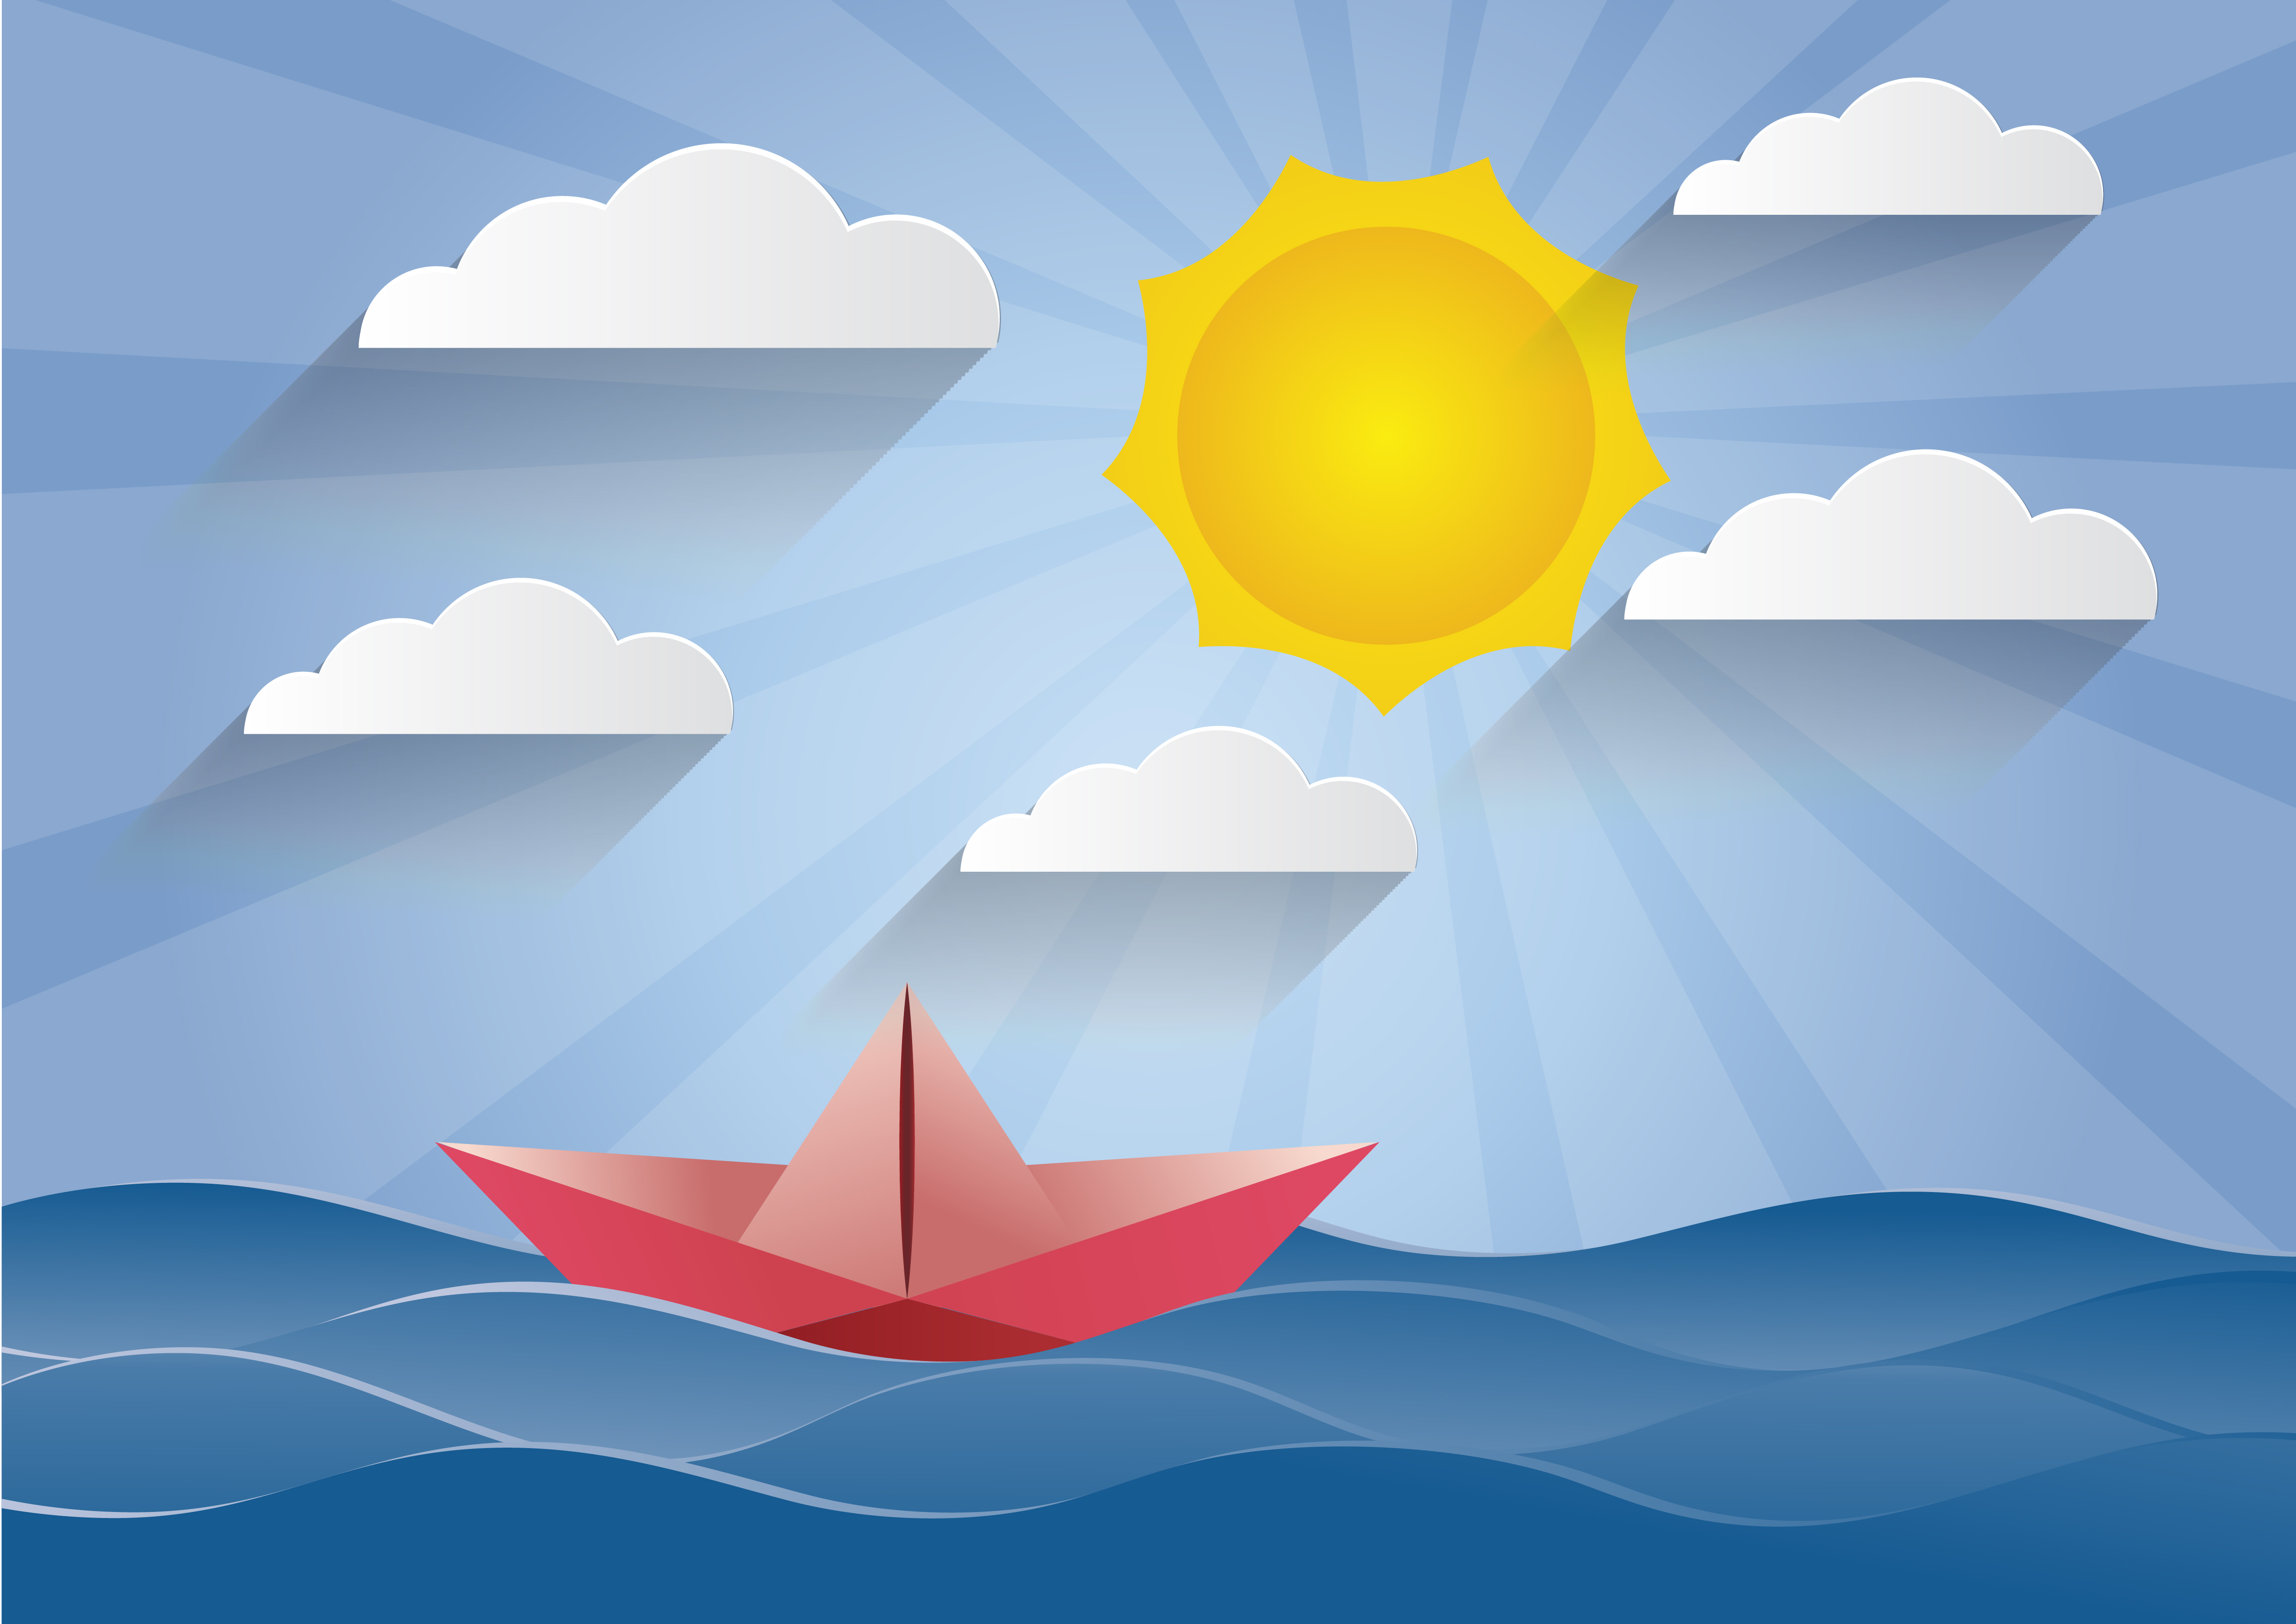 origami made red boat.paper art style. Download Free Vectors, Clipart Graphics & Vector Art